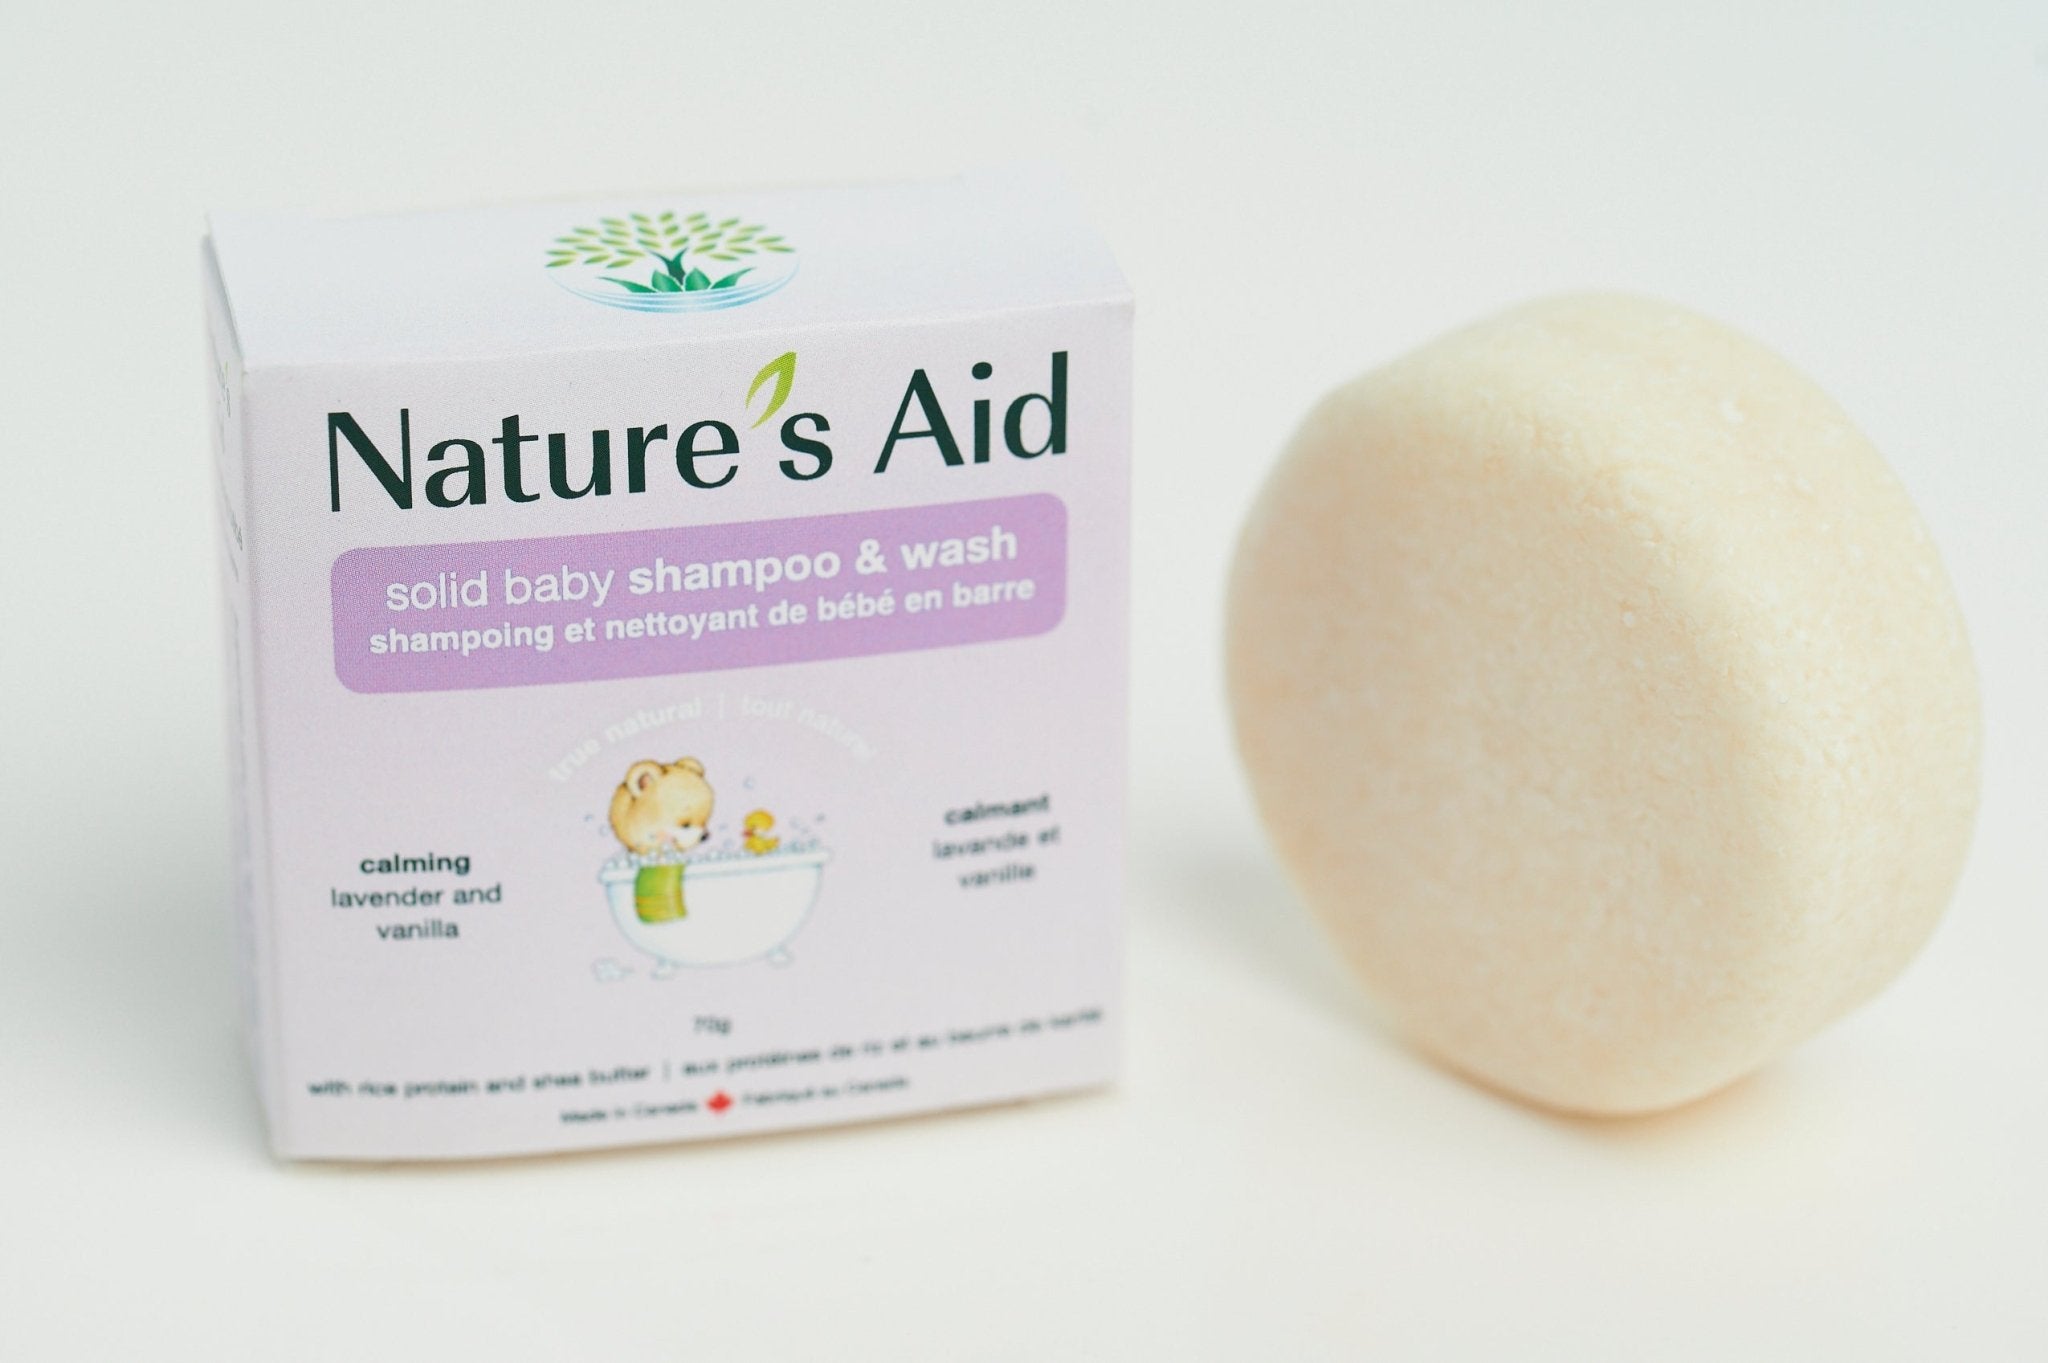 Baby Shampoo & Wash | Solid - Nature's Aid, lavender, orderform